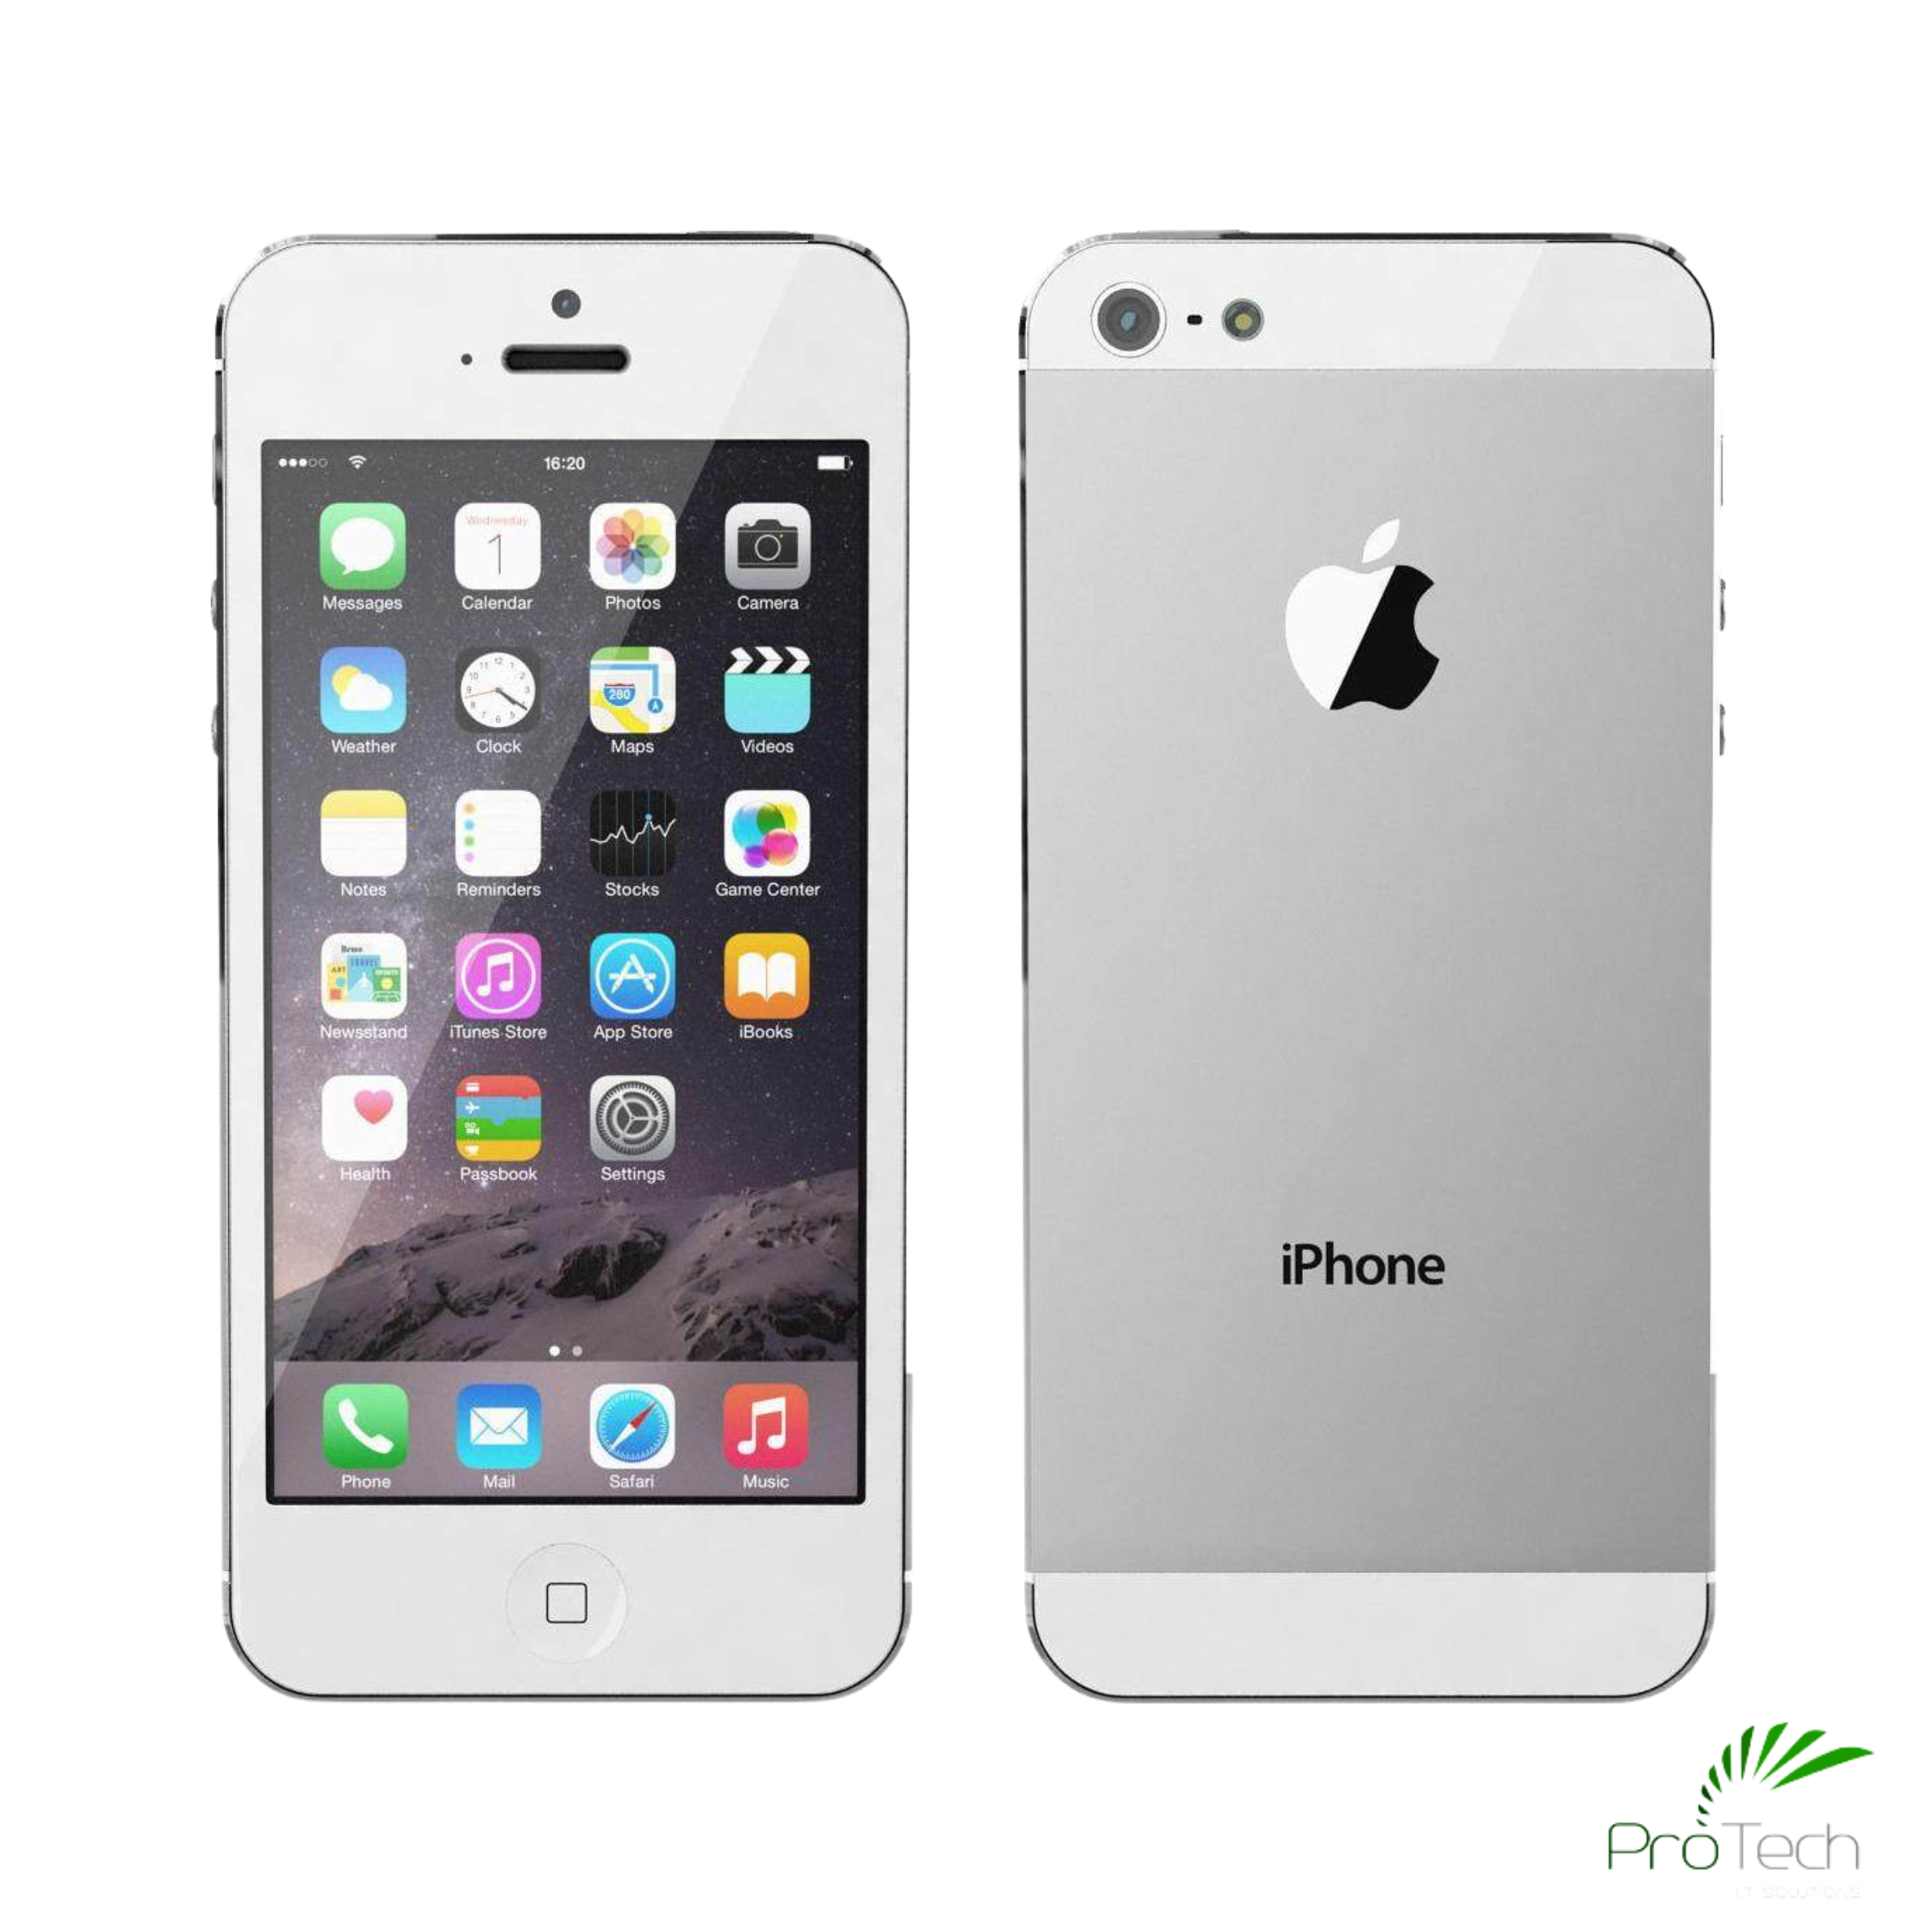 Apple iPhone 16GB – ProTech IT Solutions